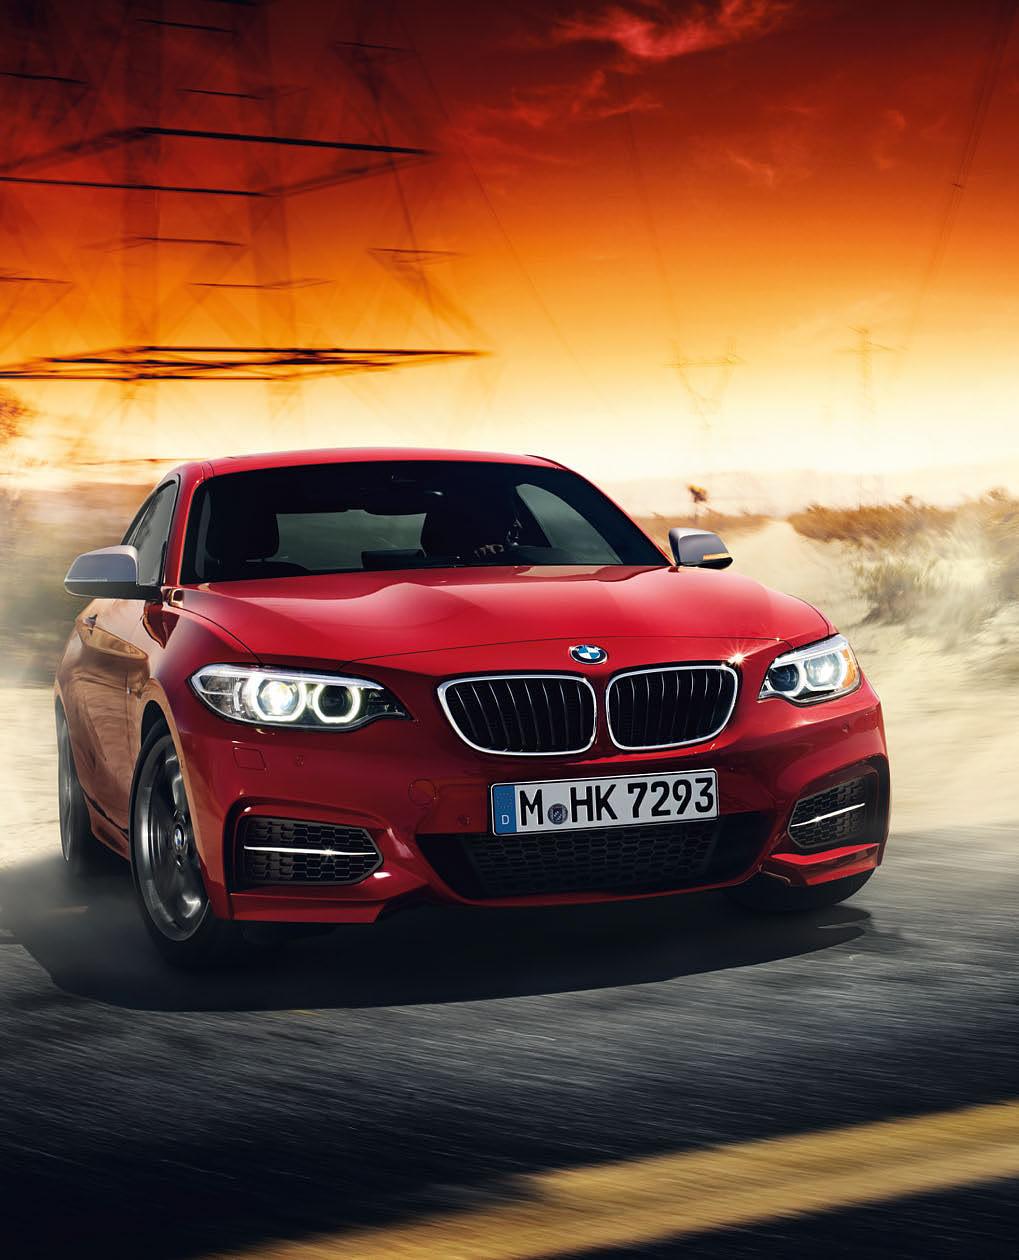 THE BEST DUST IS THE ONE YOU LEAVE IN YOUR WAKE. The M235i xdrive takes 4.